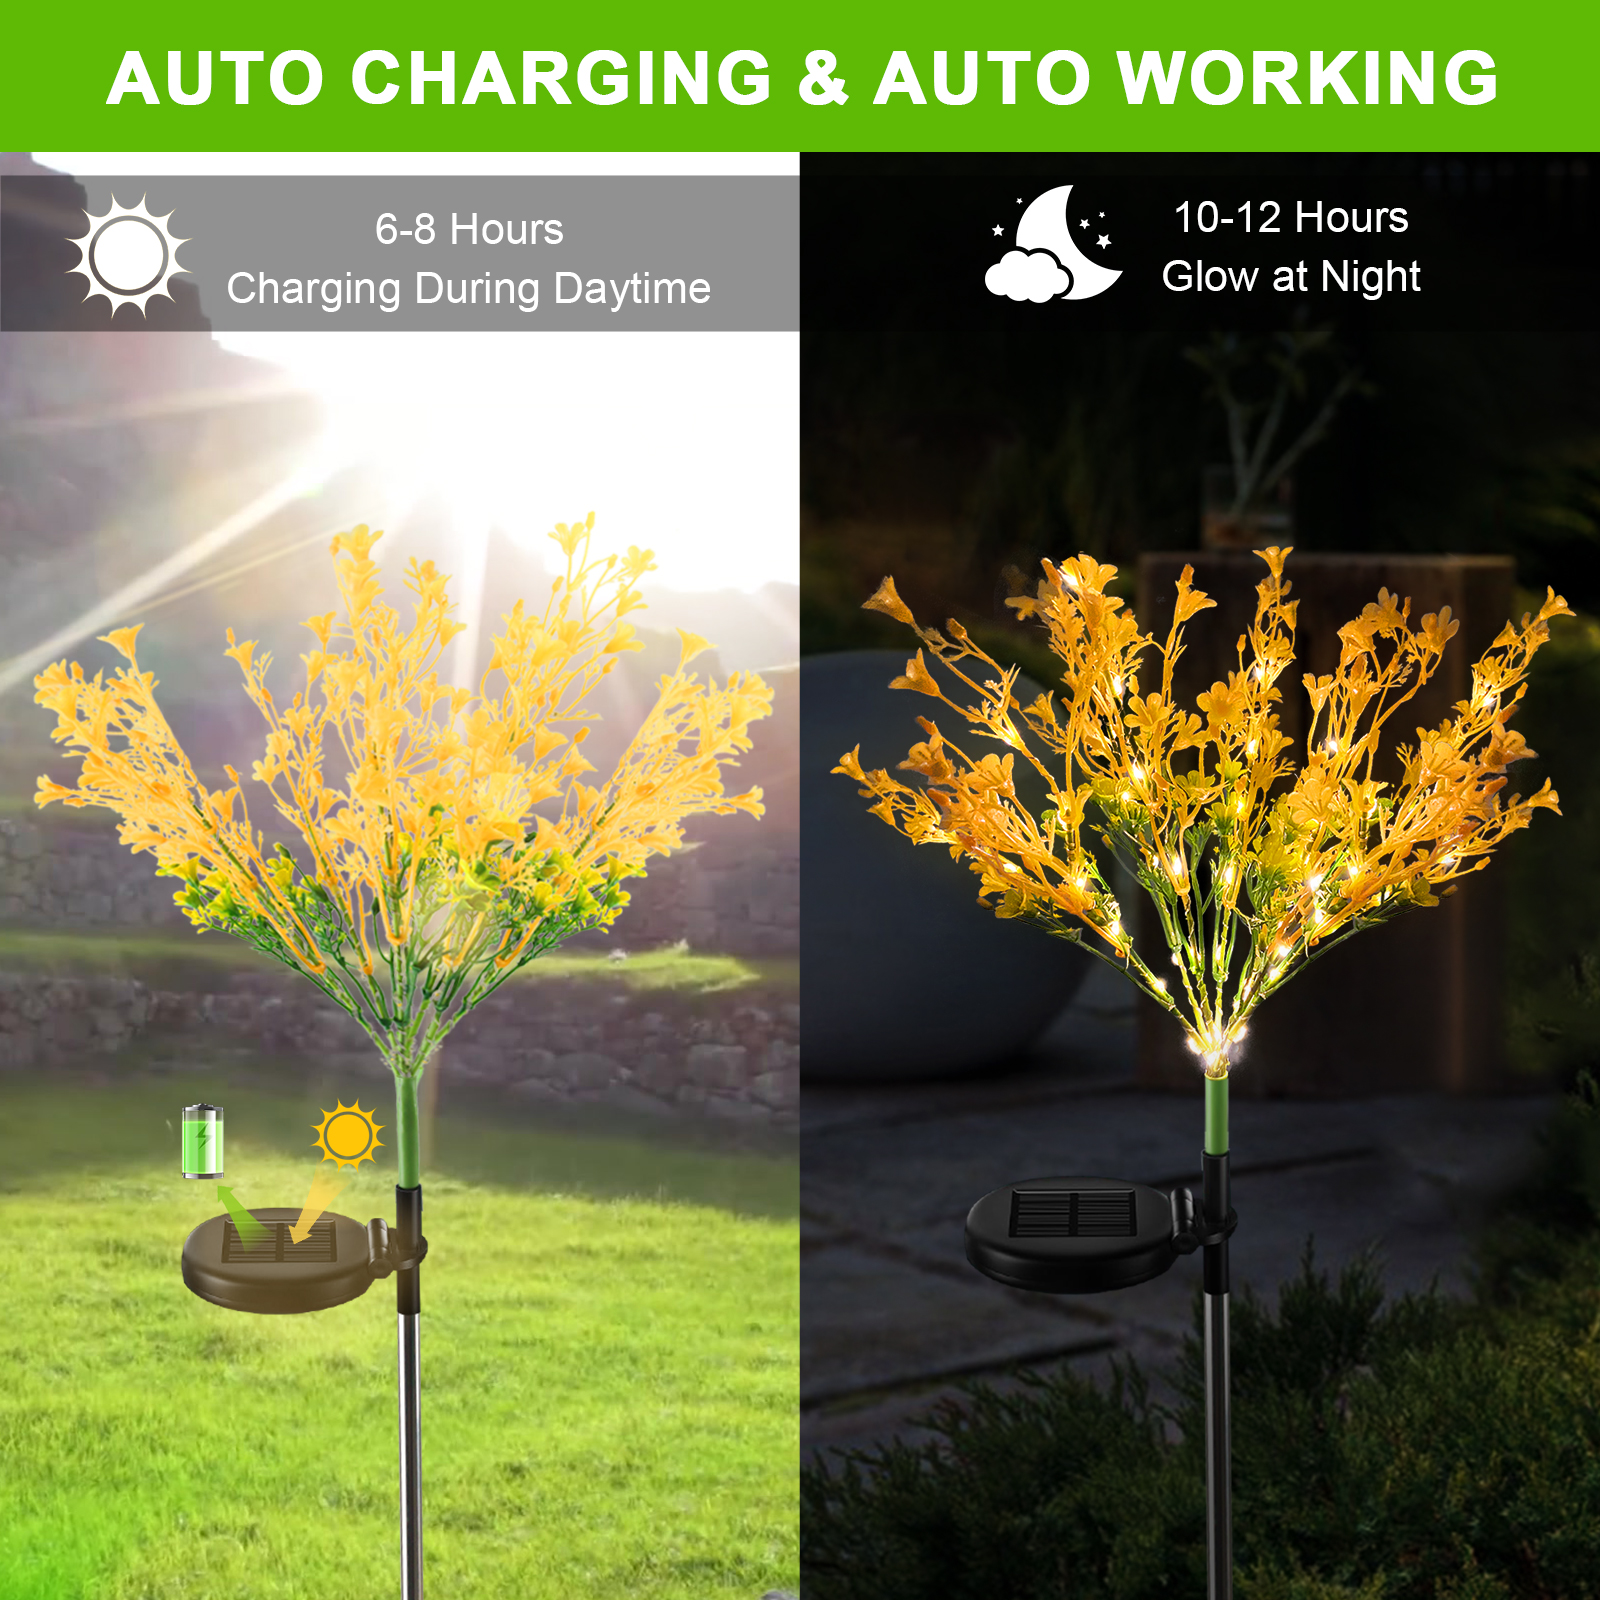 2 Pcs Solar Garden Lights for Outdoor Decorative, Solar Flowers Lights from Dusk to Dawn, Solar Garden Stake Lights Waterproof IP65, Solar Powered Flower Lights for Patio, Garden, Yard, Lawn, Pathway - image 3 of 9